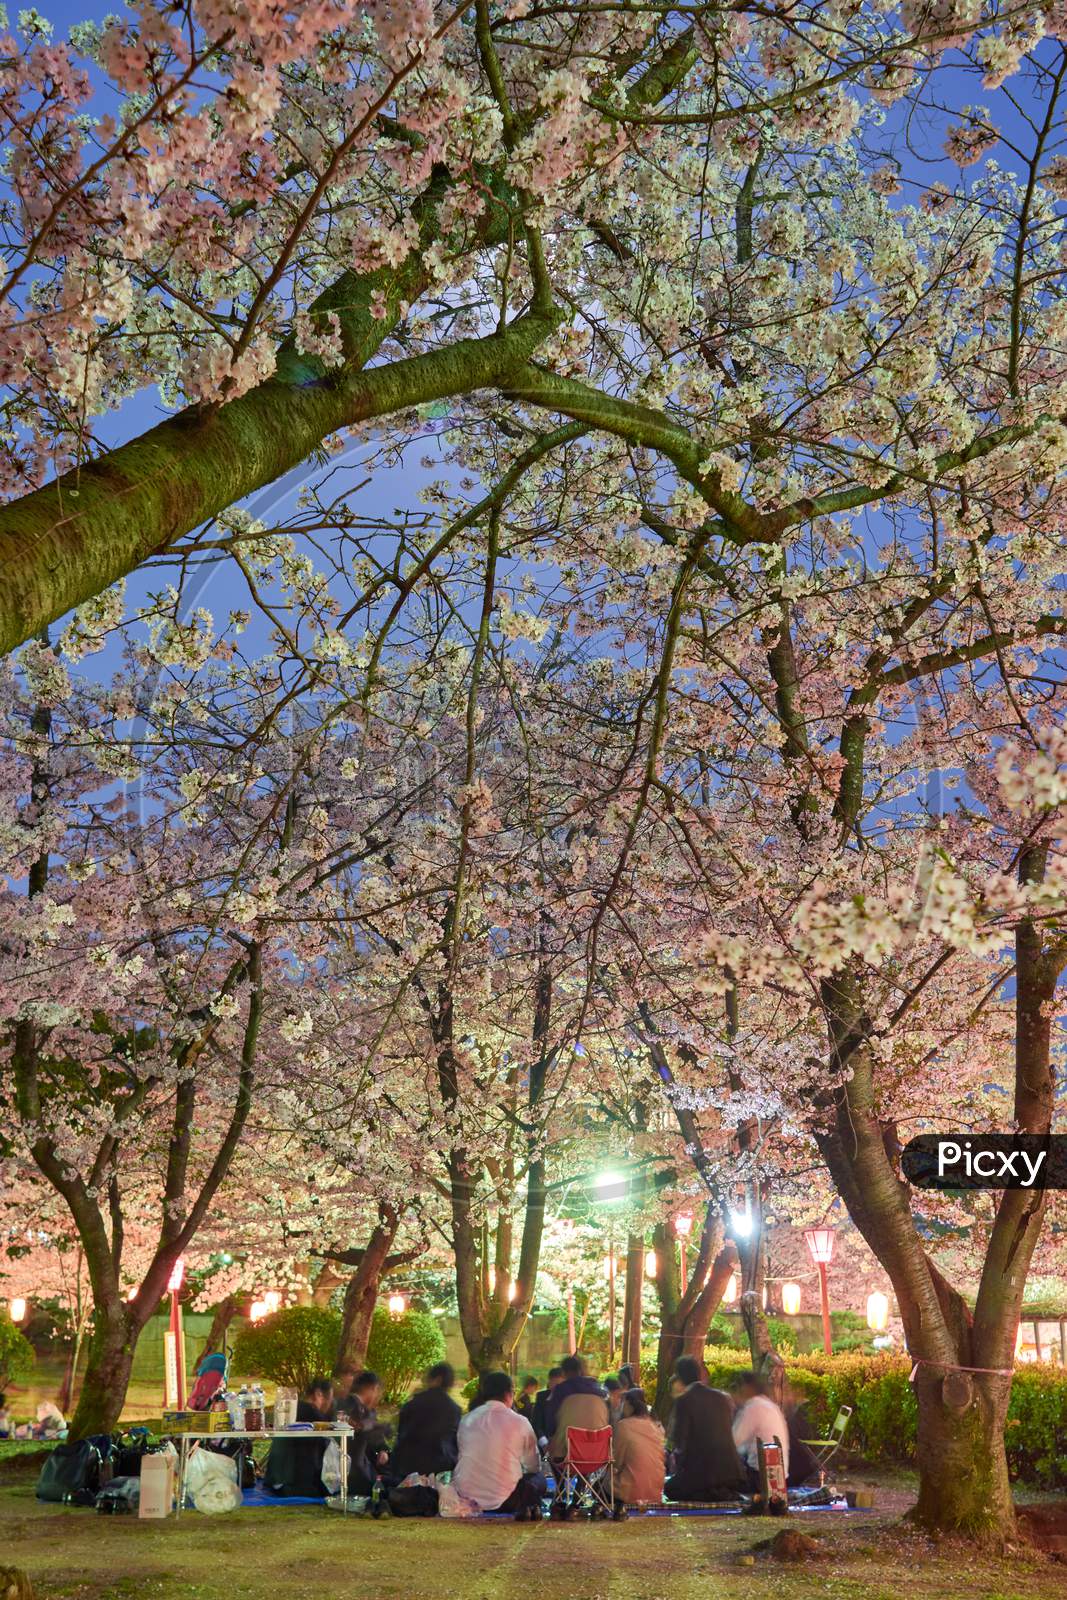 People Picnicking Under Blooming Cherry Blossom Trees In Wakayama, Japan